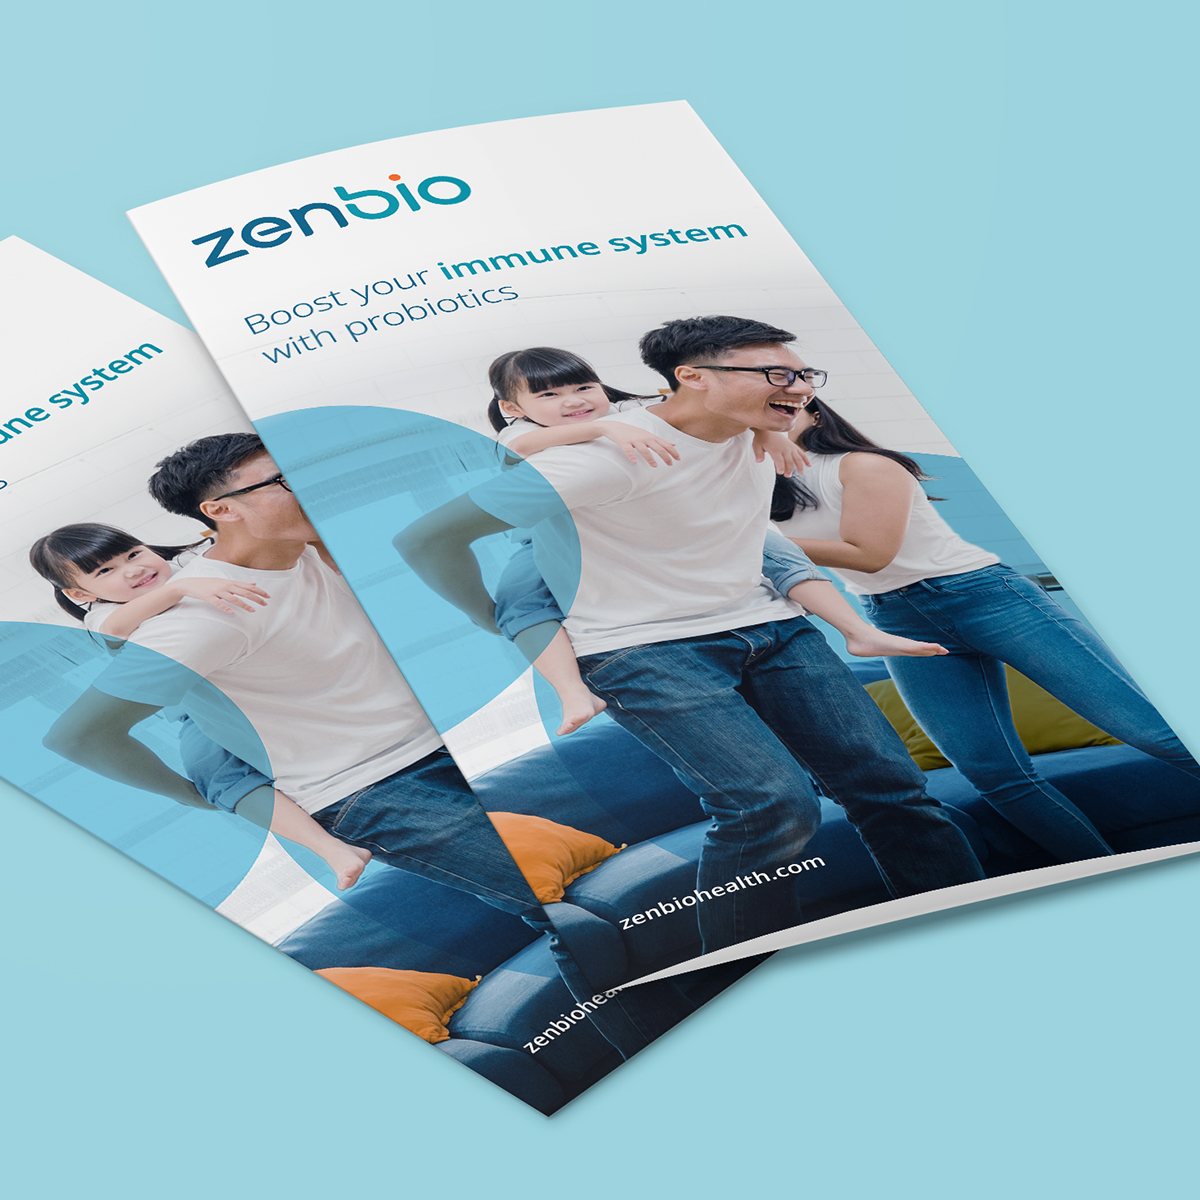 We have created a visual identity and packaging design for Zenbio, a new range of probiotics developed by B.Grimm Healthcare. 

#zenbiohealth #BGrimm144 #Thailand #BrandIdentity #Packaging #BrandStrategy #BrandGuidelines #DigitalMarketing #Communications #probiotic #supplements